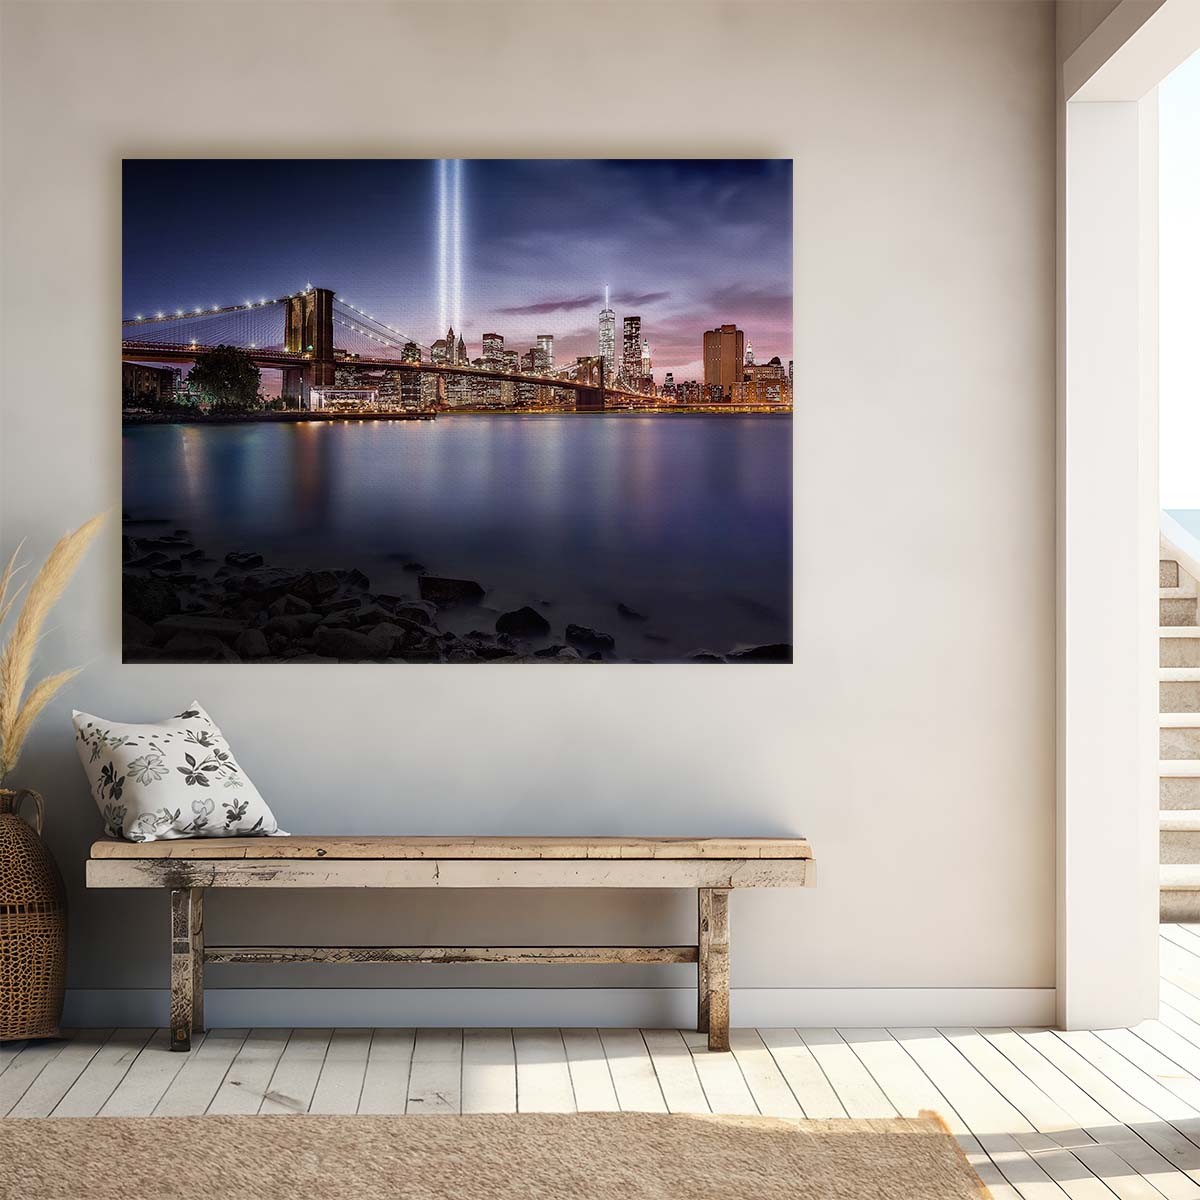 Iconic Brooklyn Bridge NYC Night Cityscape Wall Art by Luxuriance Designs. Made in USA.